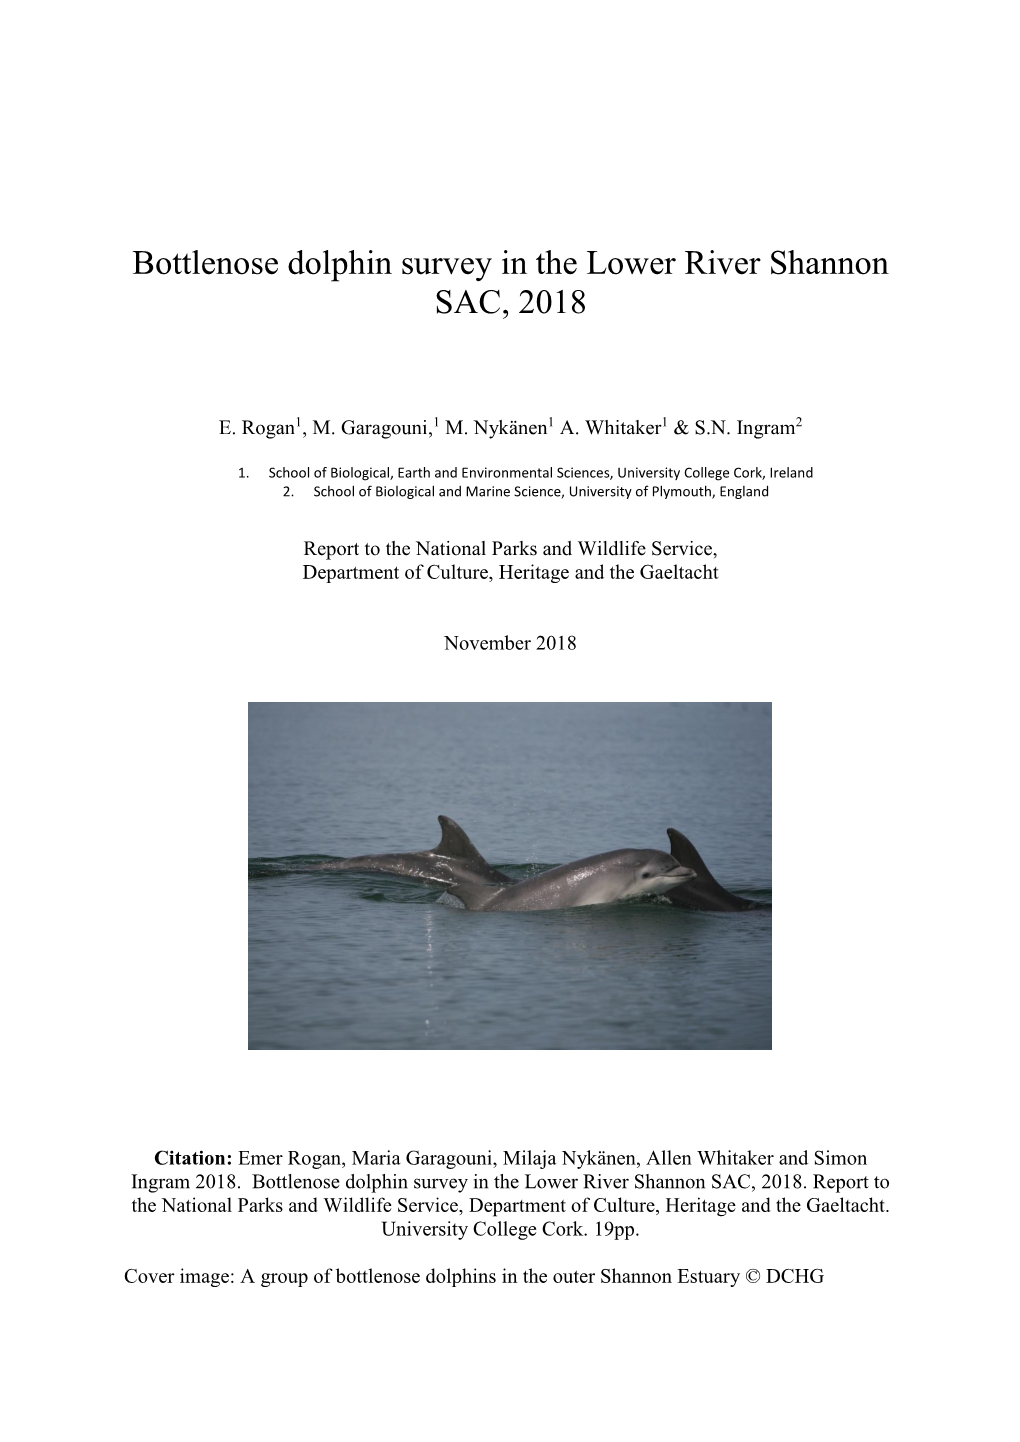 Bottlenose Dolphin Survey in the Lower River Shannon SAC, 2018